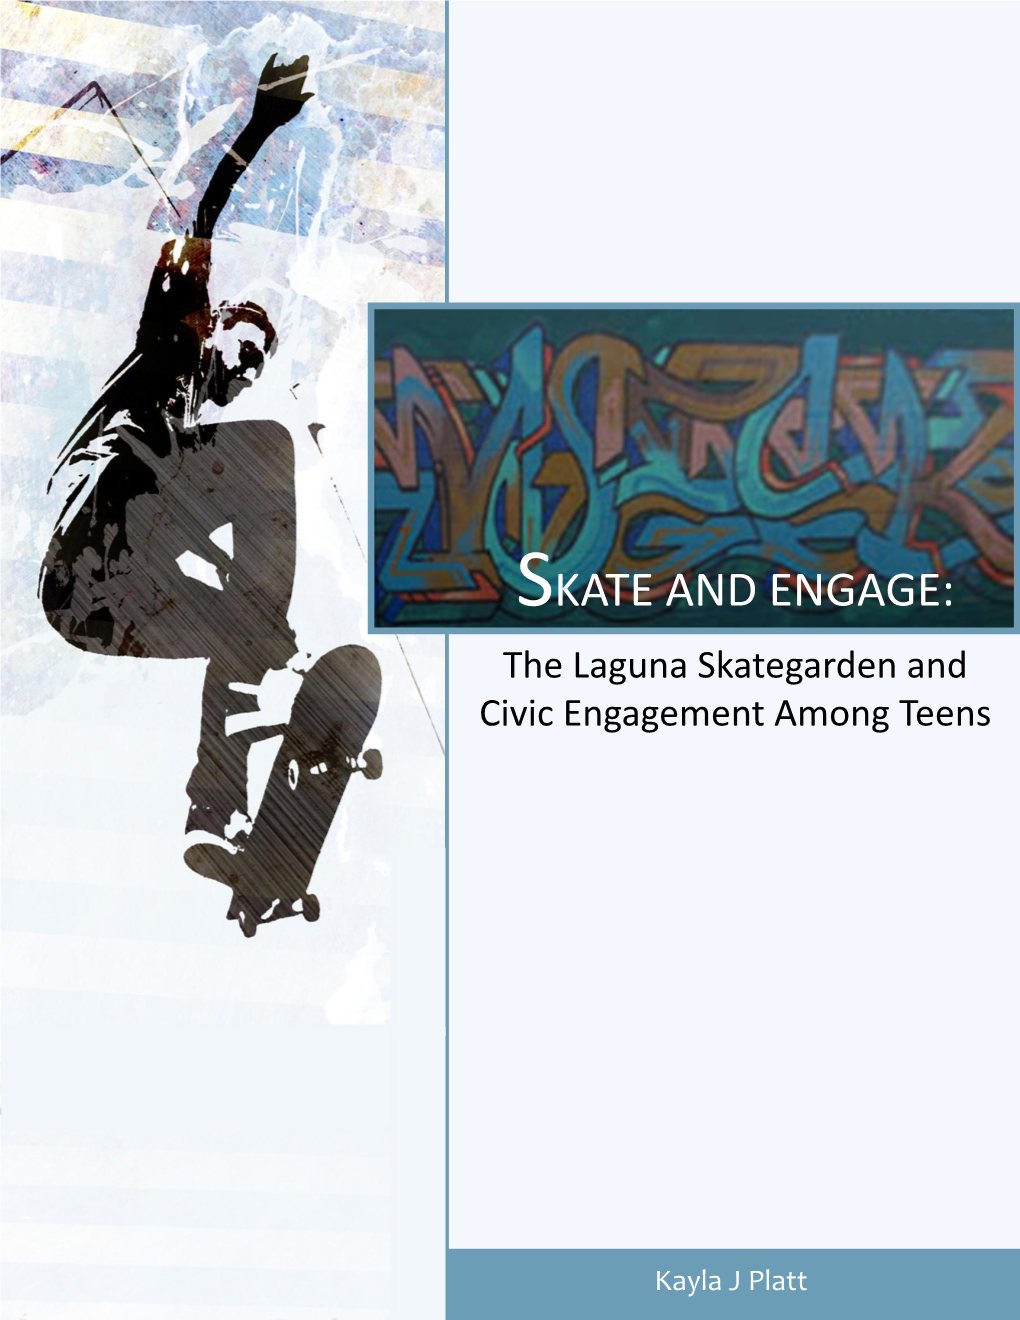 SKATE and ENGAGE: the Laguna Skategarden and Civic Engagement Among Teens